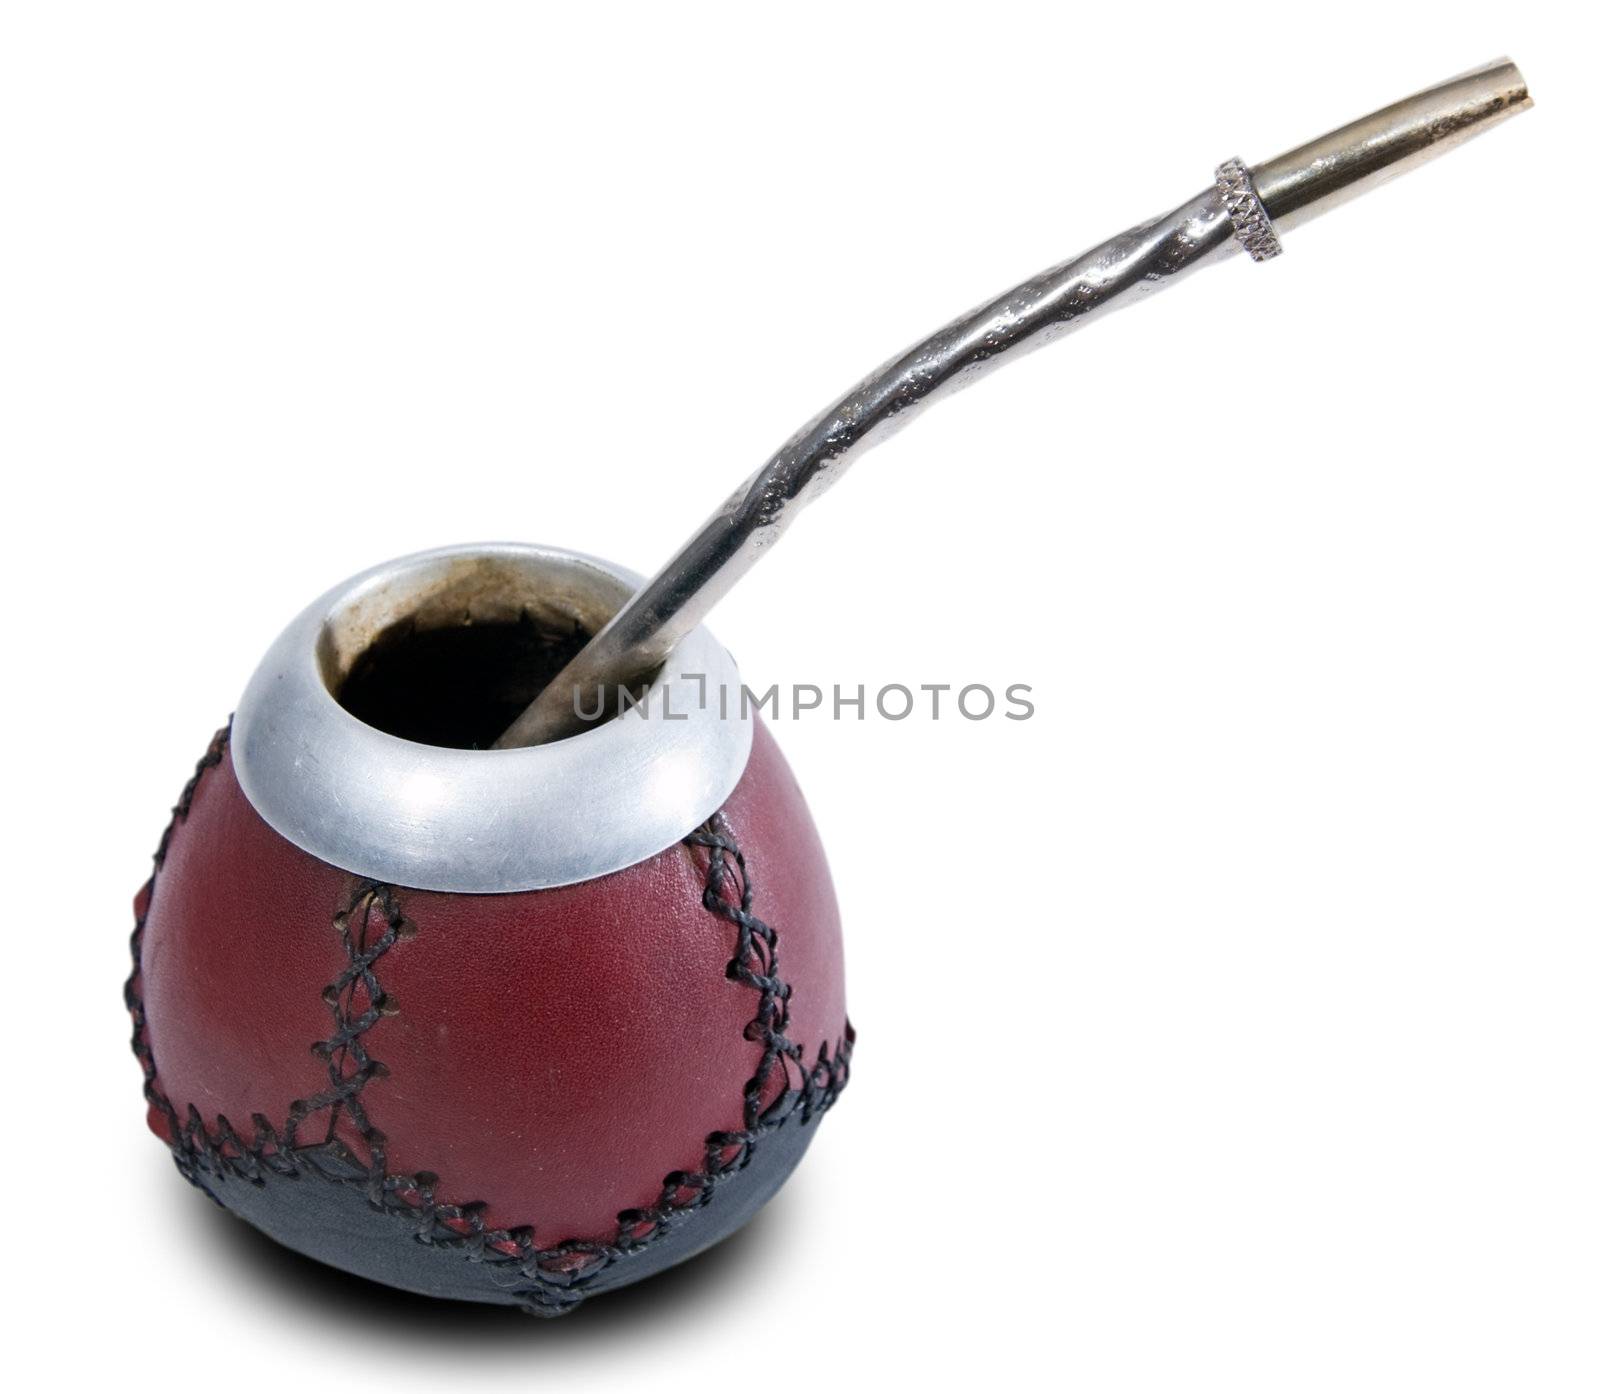 Сup from calabash with yerba mate tea and straw.